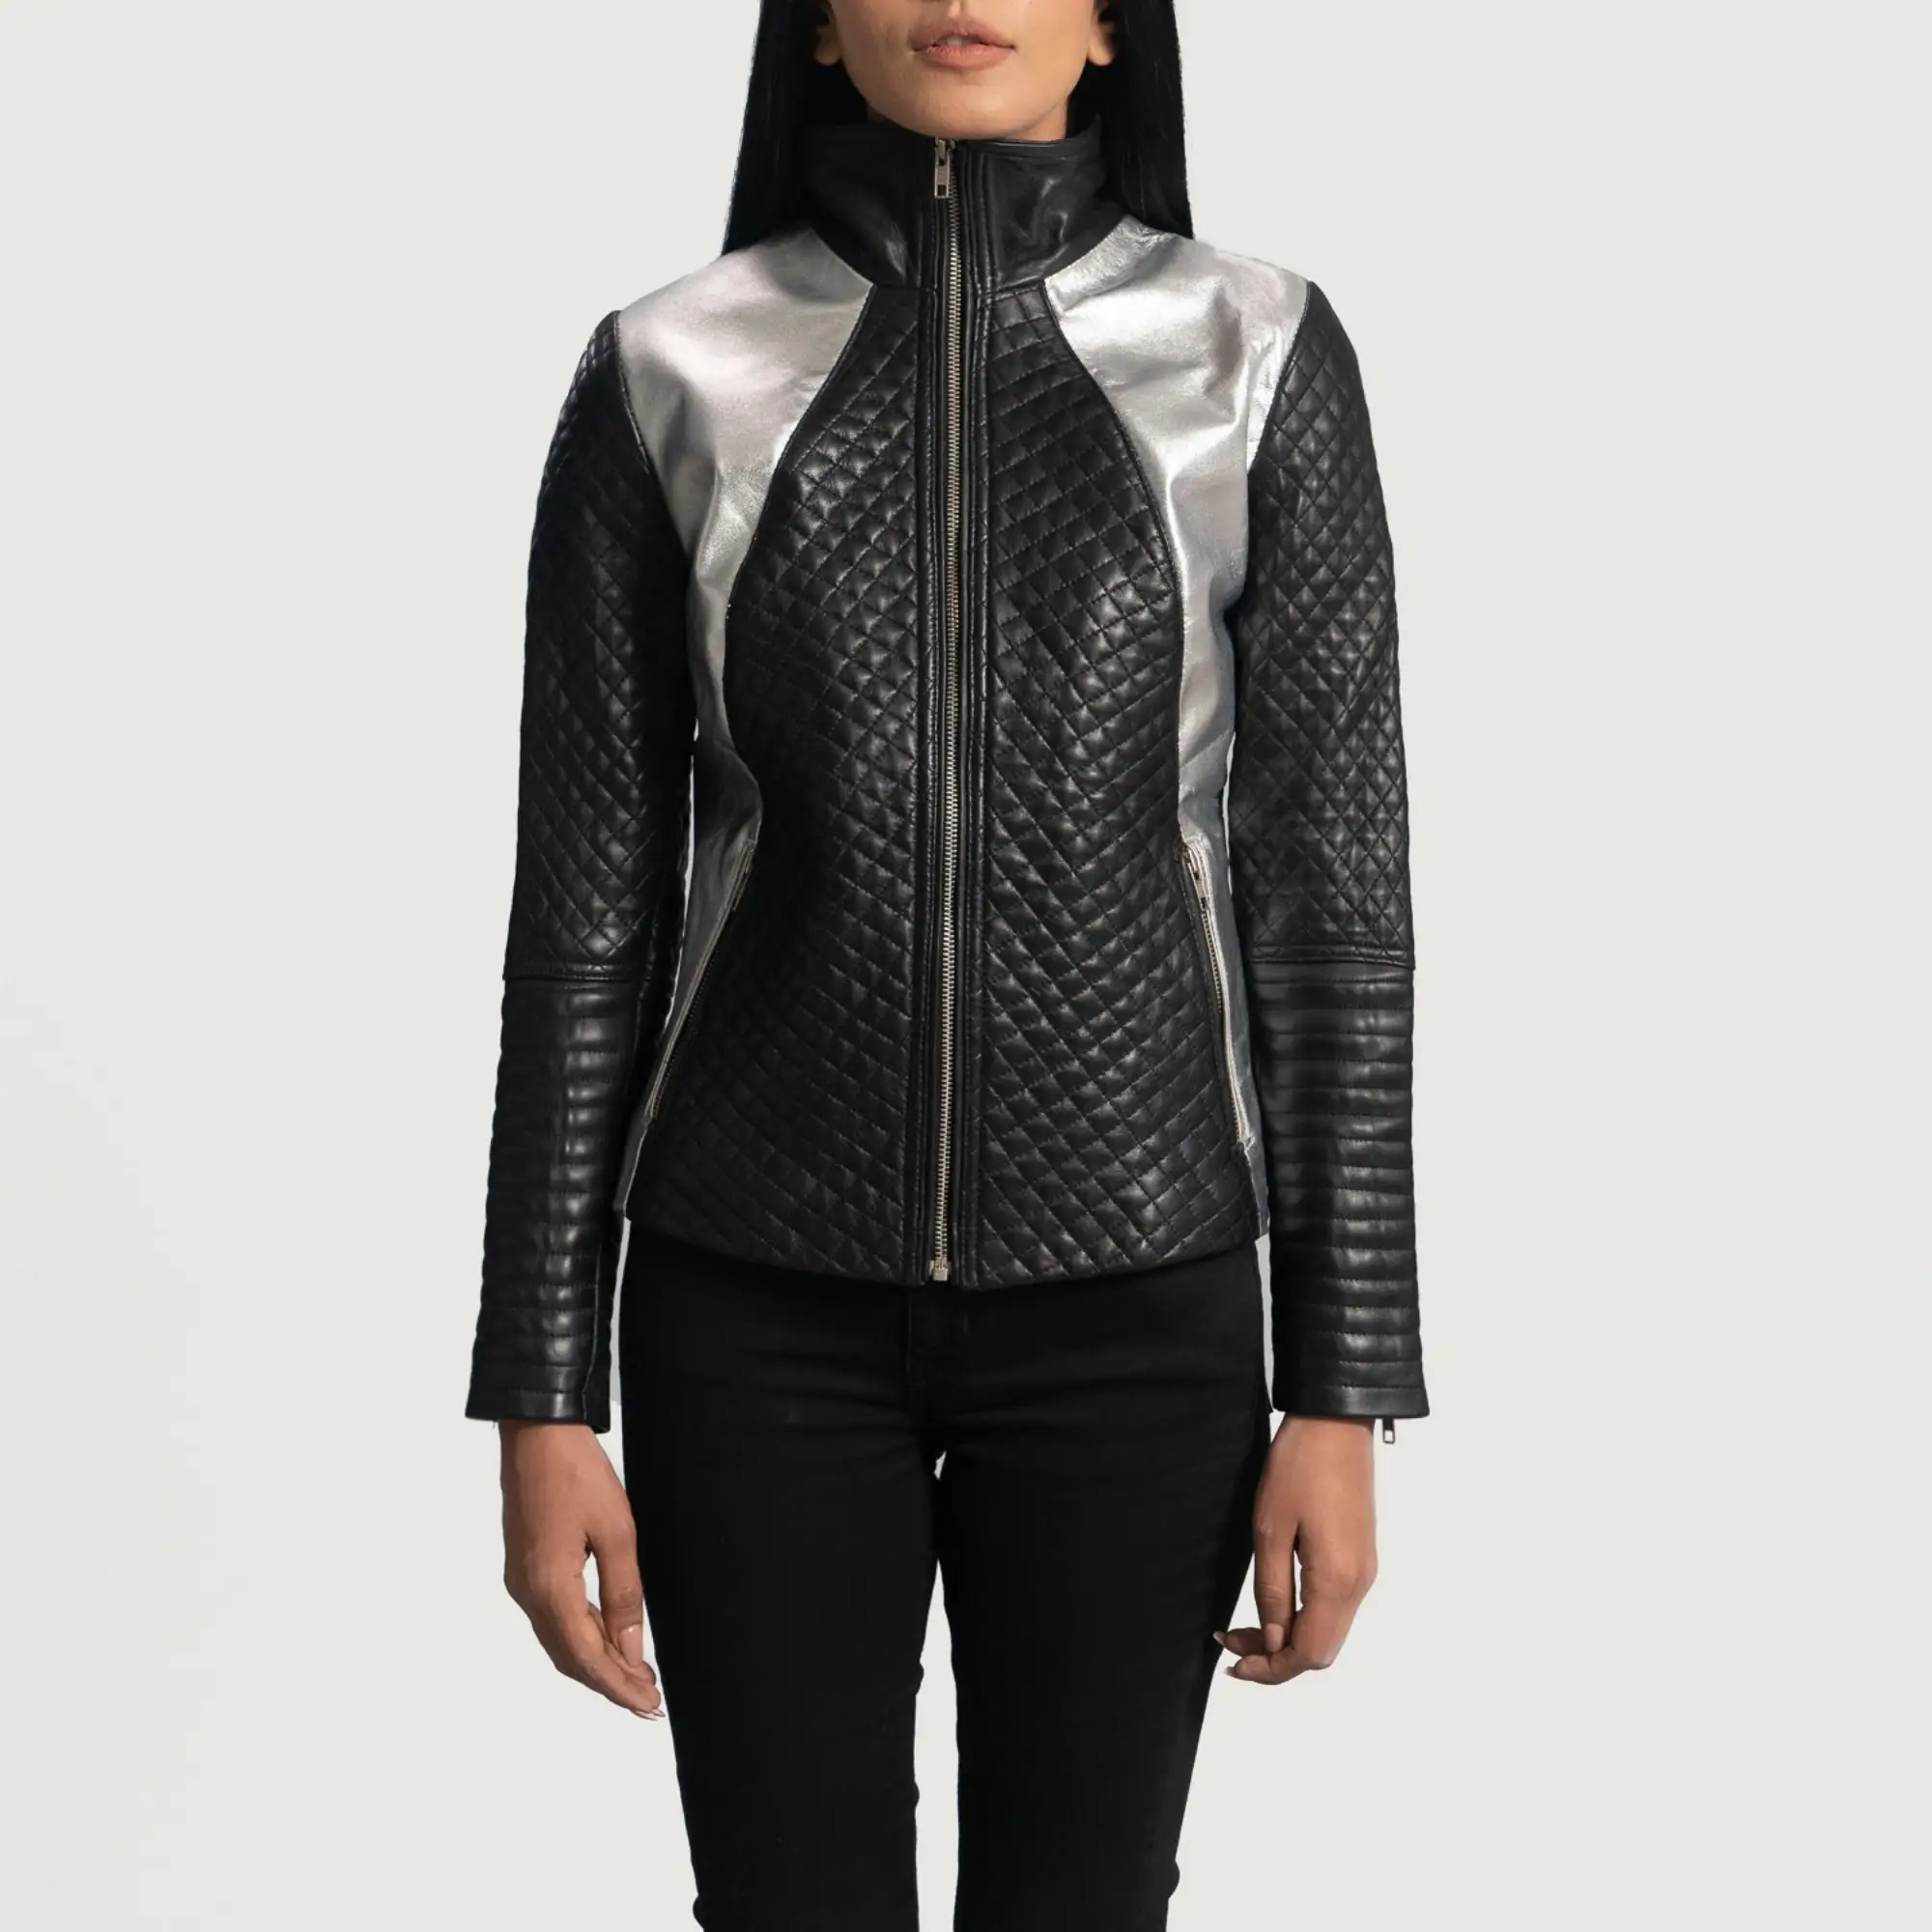 Real Leather Sheepskin Aniline Zipper Alia Metallic Black Women Biker Jacket with Quilted Viscose Lining and Inside Outside Pock